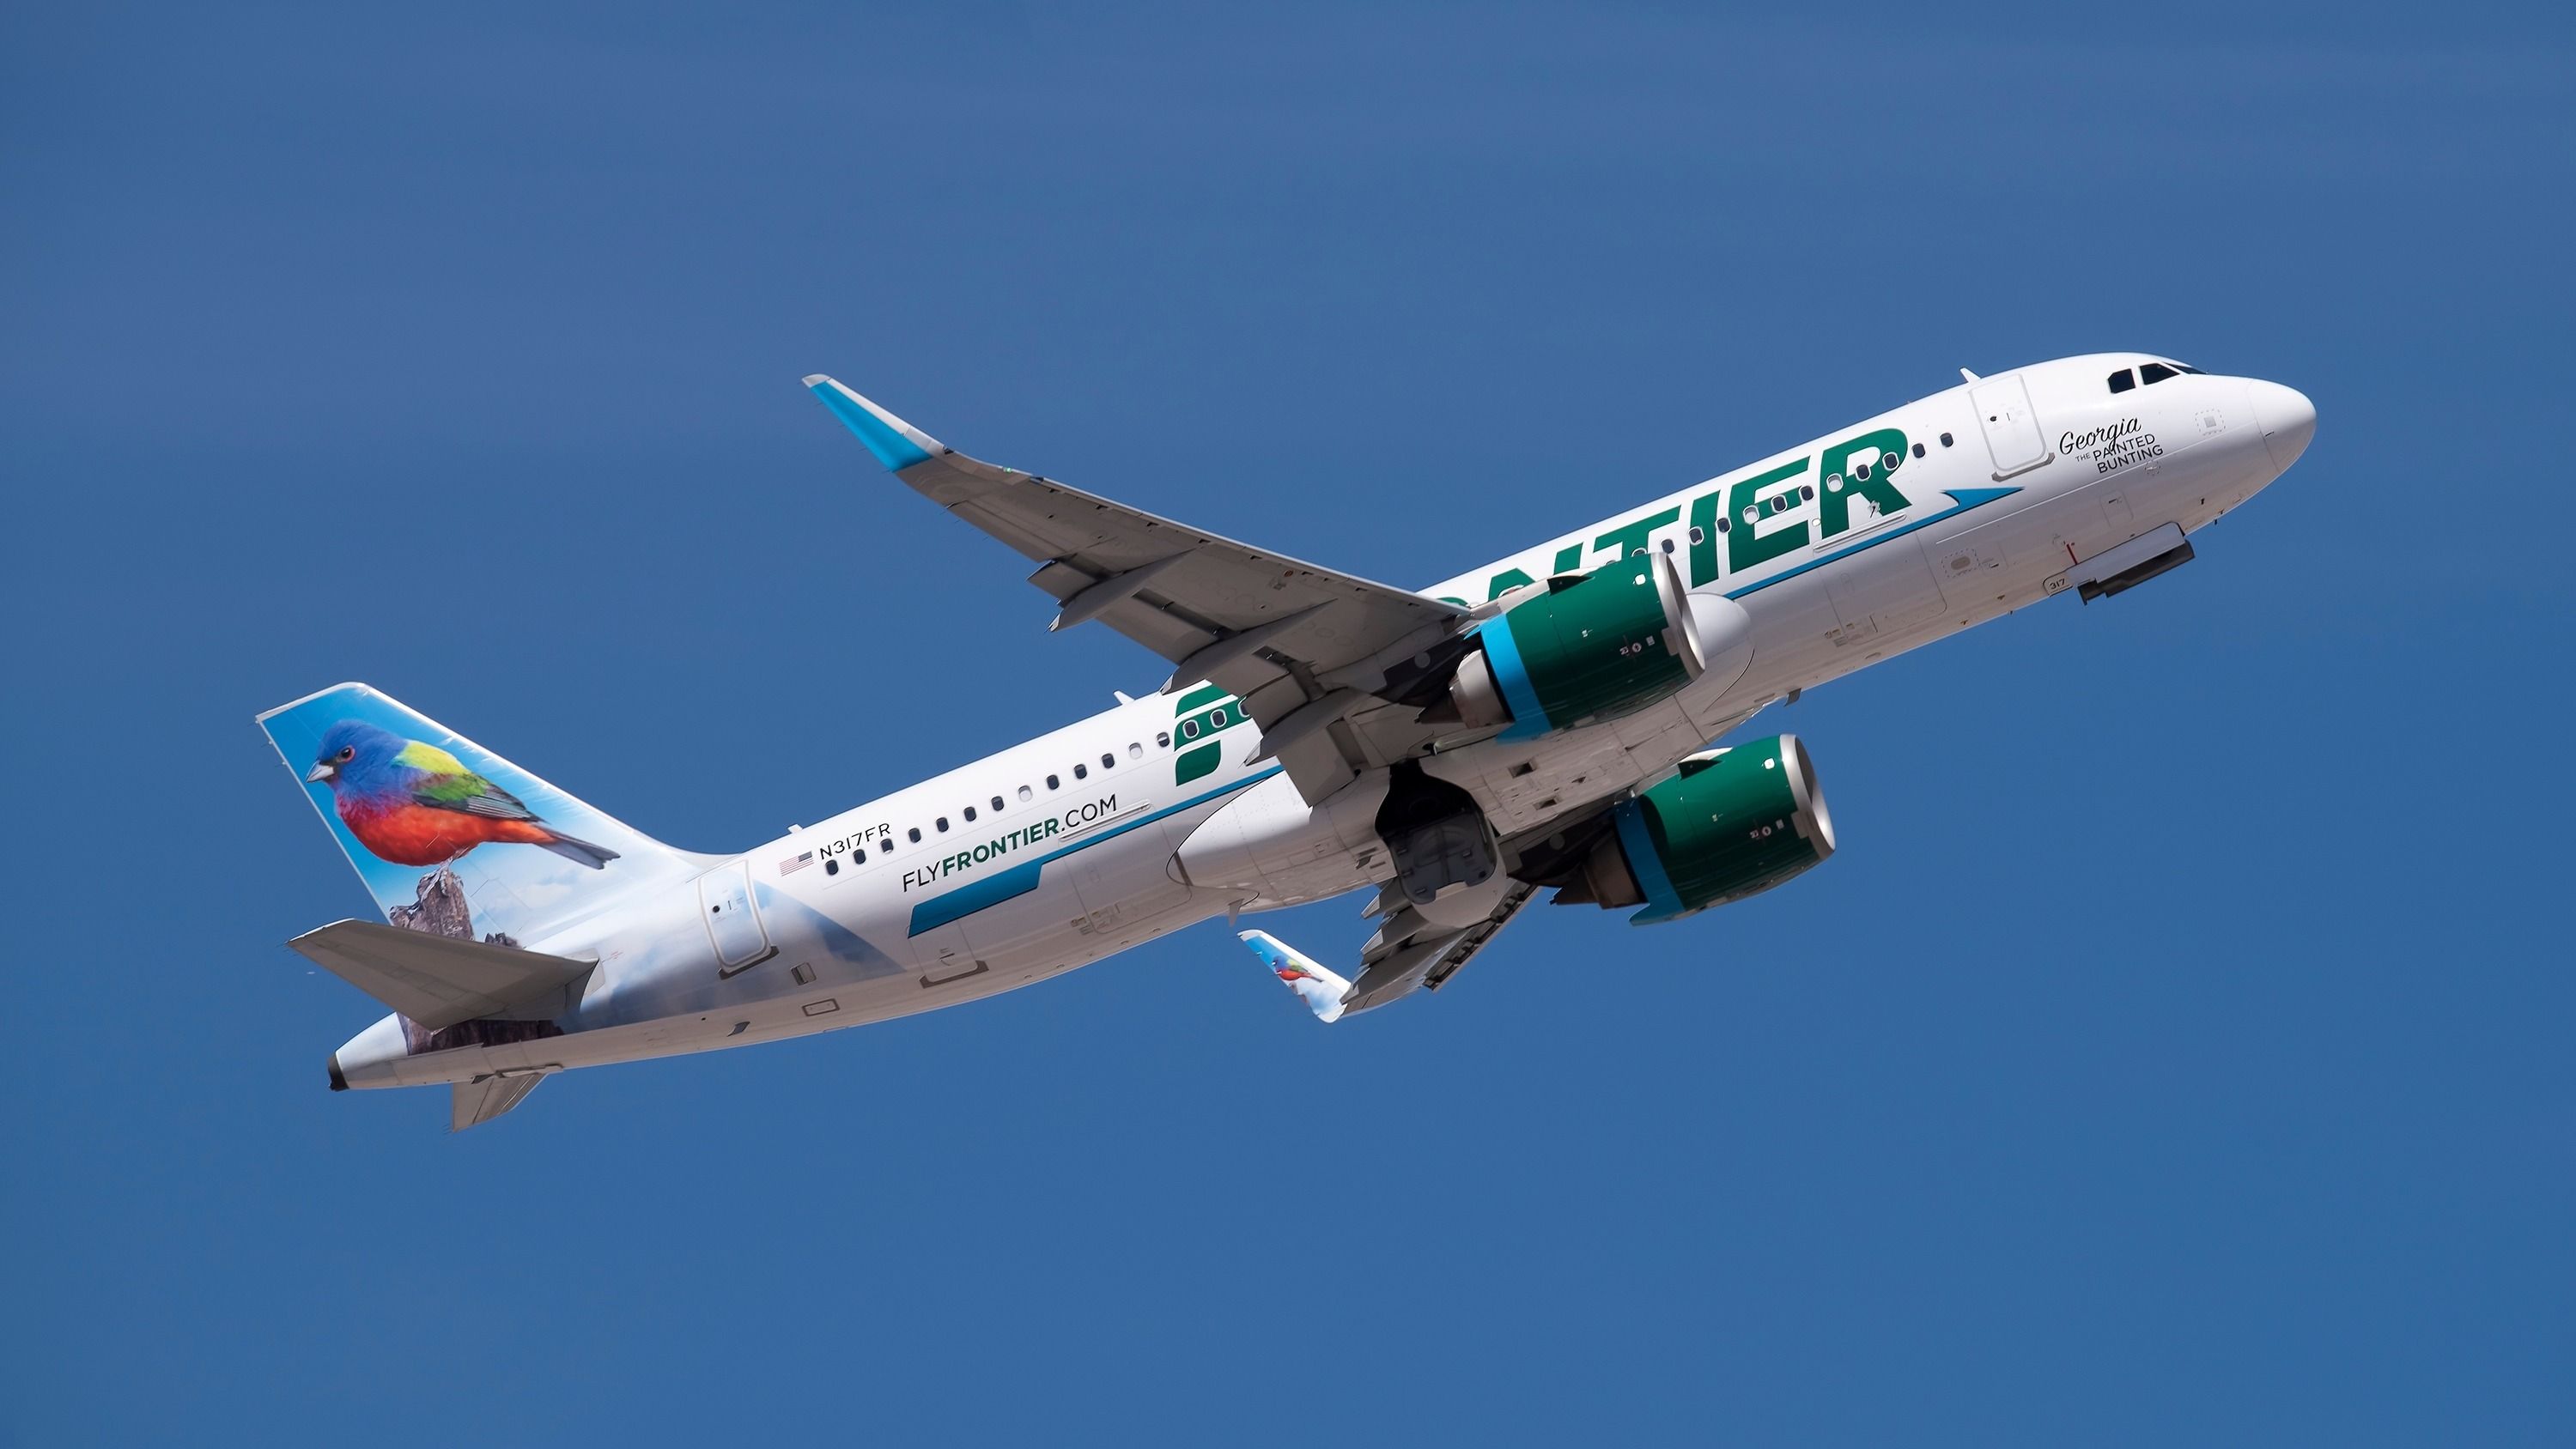 A Frontier Airlines Airbus A320neo